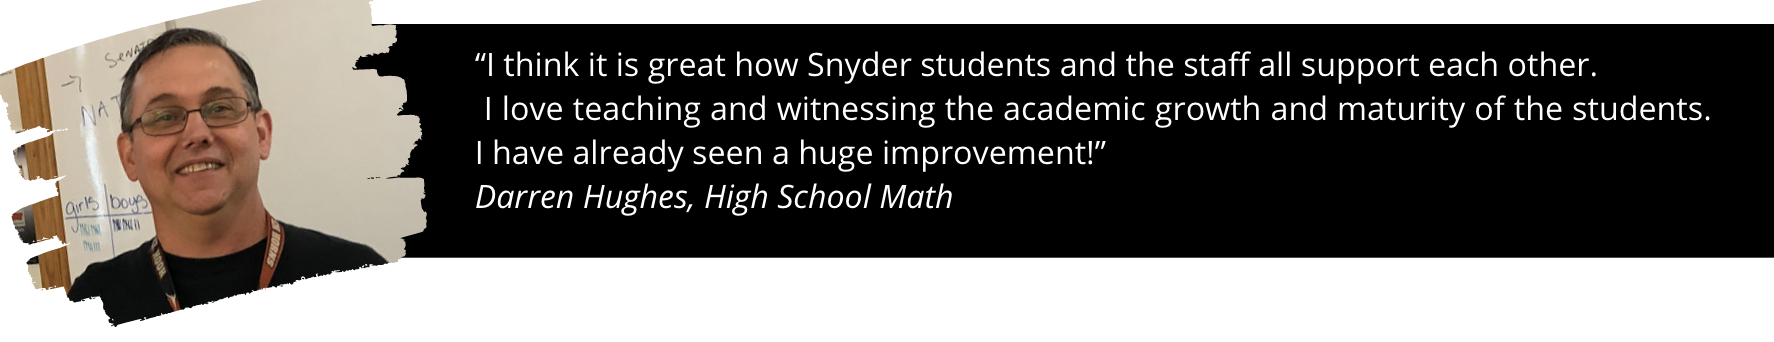 Photo of Mr. Huges and quote: “I think it is great how Snyder students and the staff all support each other.  I love teaching and witnessing the academic growth and maturity of the students. I have already seen a huge improvement!”  Darren Hughes, High School Math 